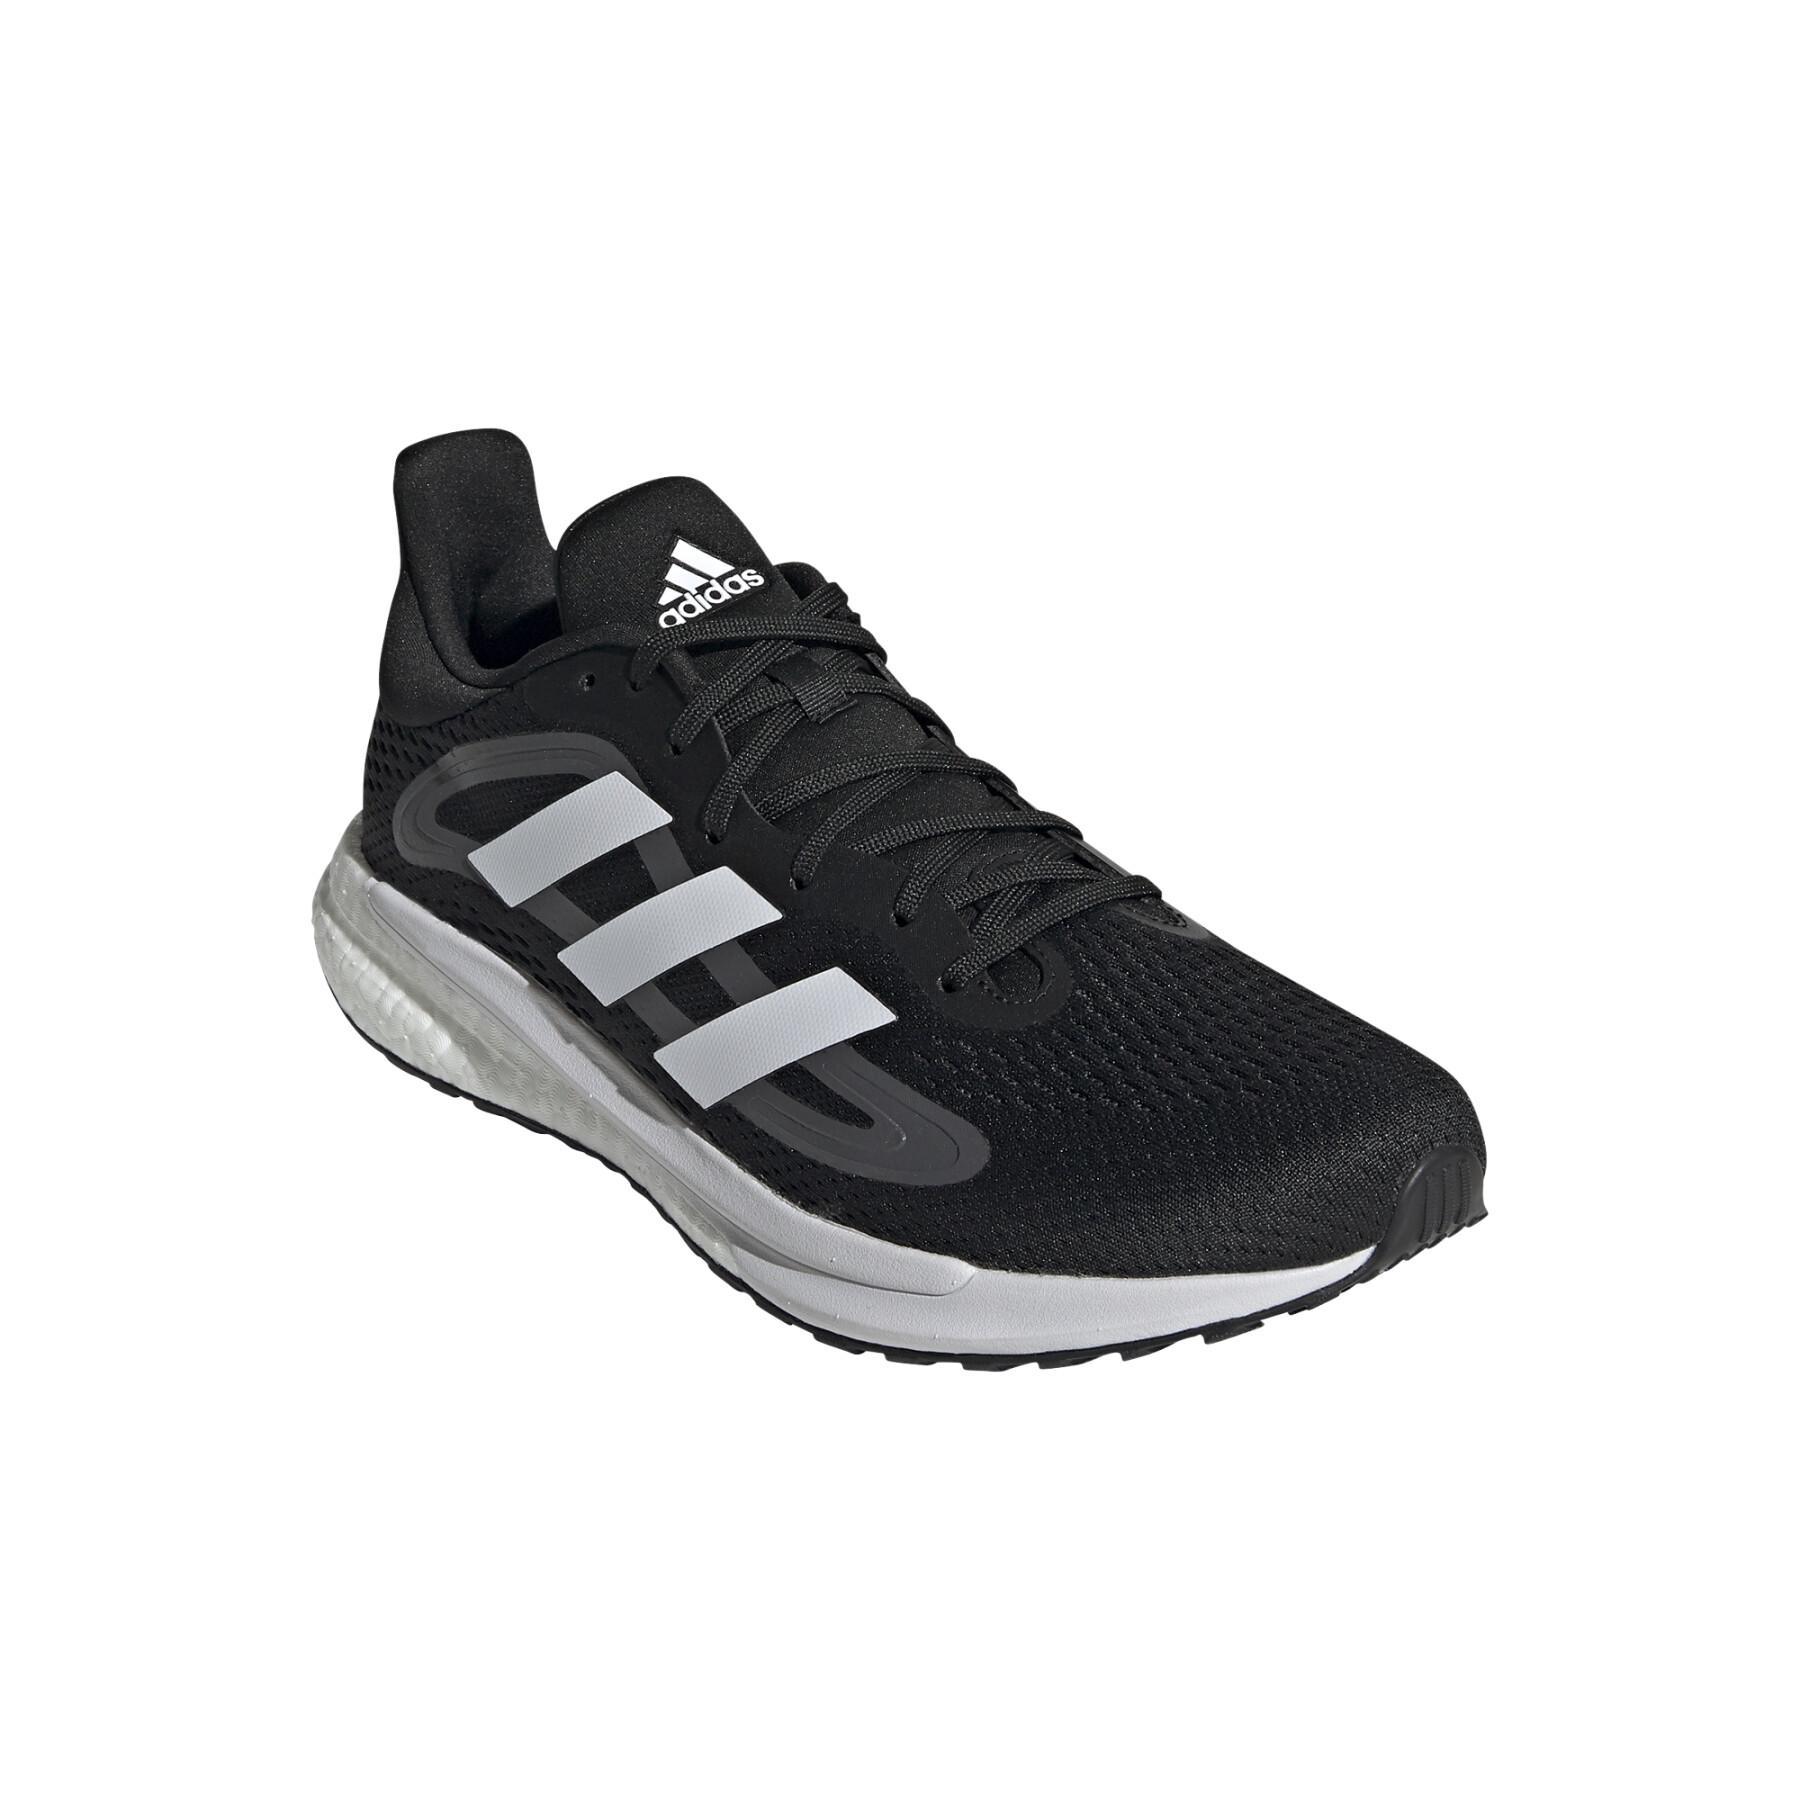 Running shoes adidas SolarGlide 4